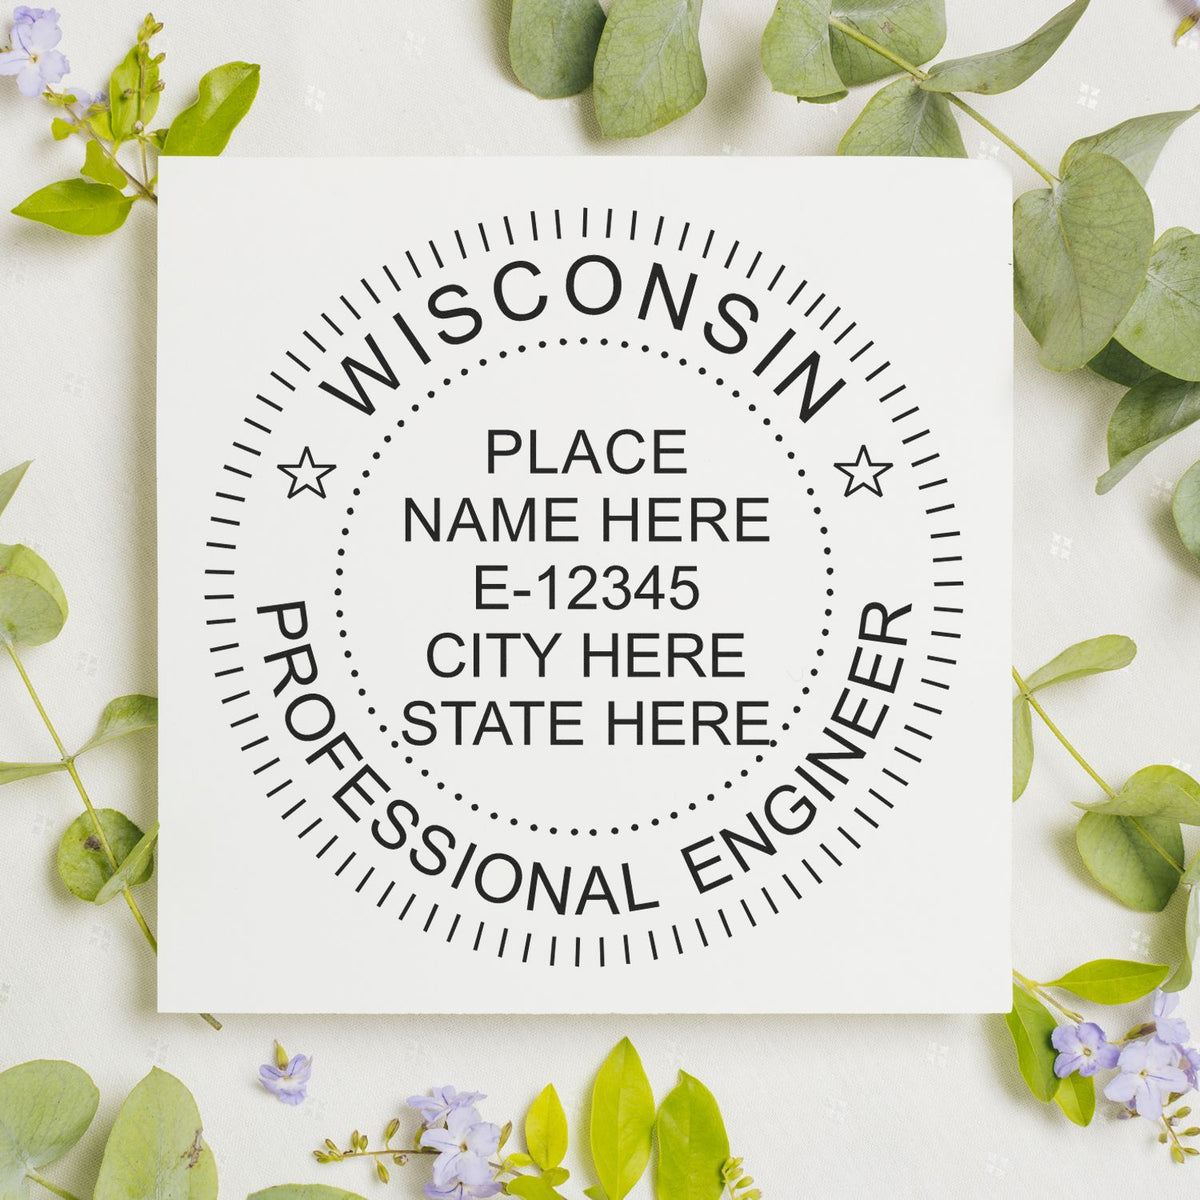 A stamped impression of the Digital Wisconsin PE Stamp and Electronic Seal for Wisconsin Engineer in this stylish lifestyle photo, setting the tone for a unique and personalized product.